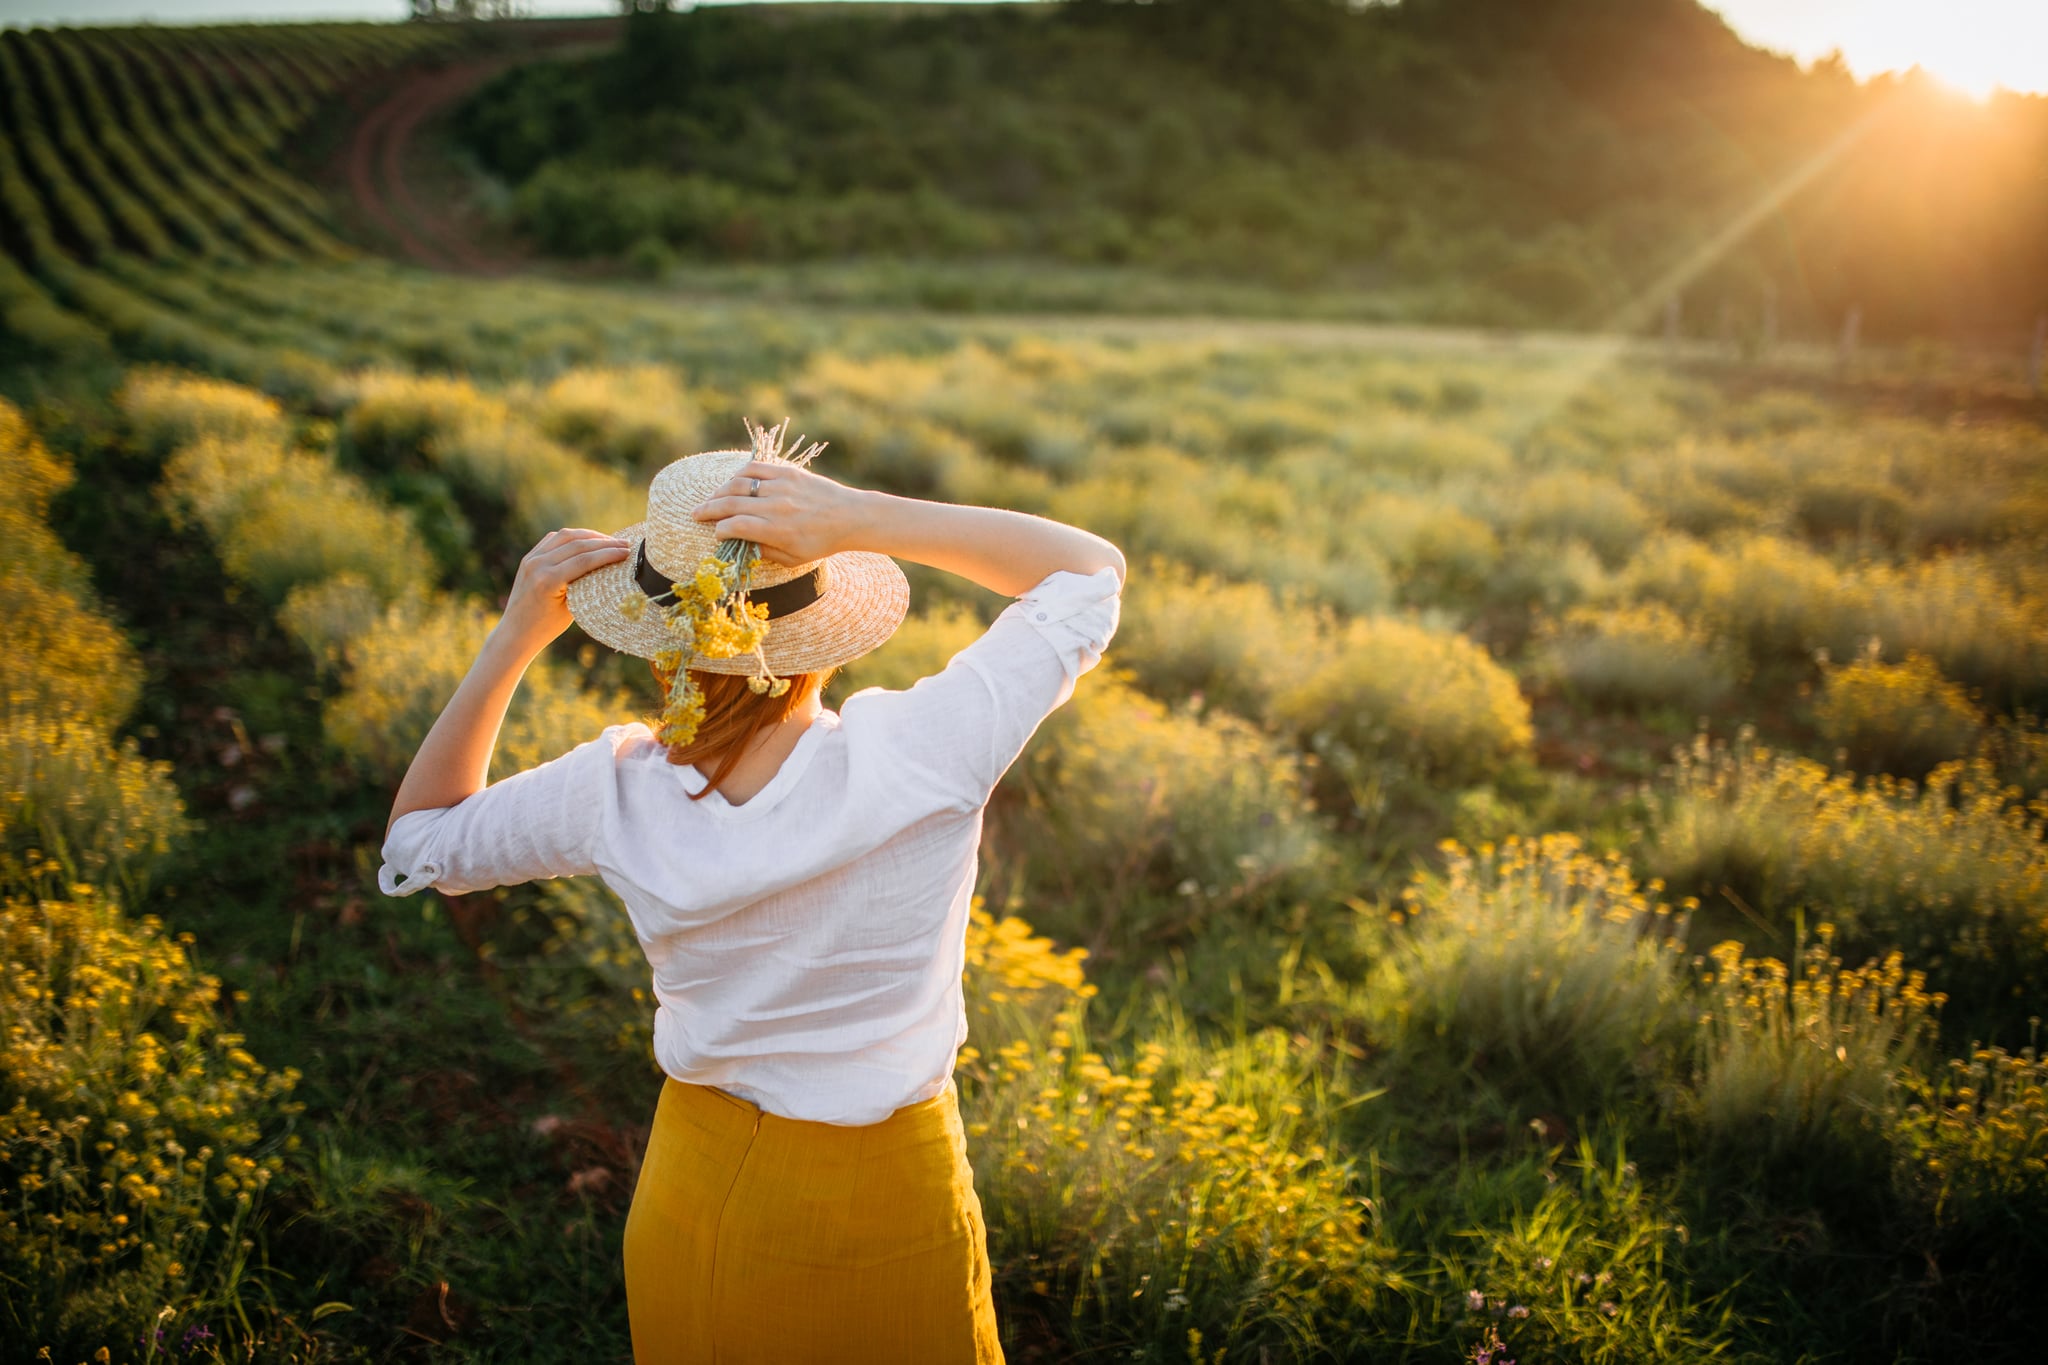 Boho style woman with hat enjoying the sunset in everlasting flowers field